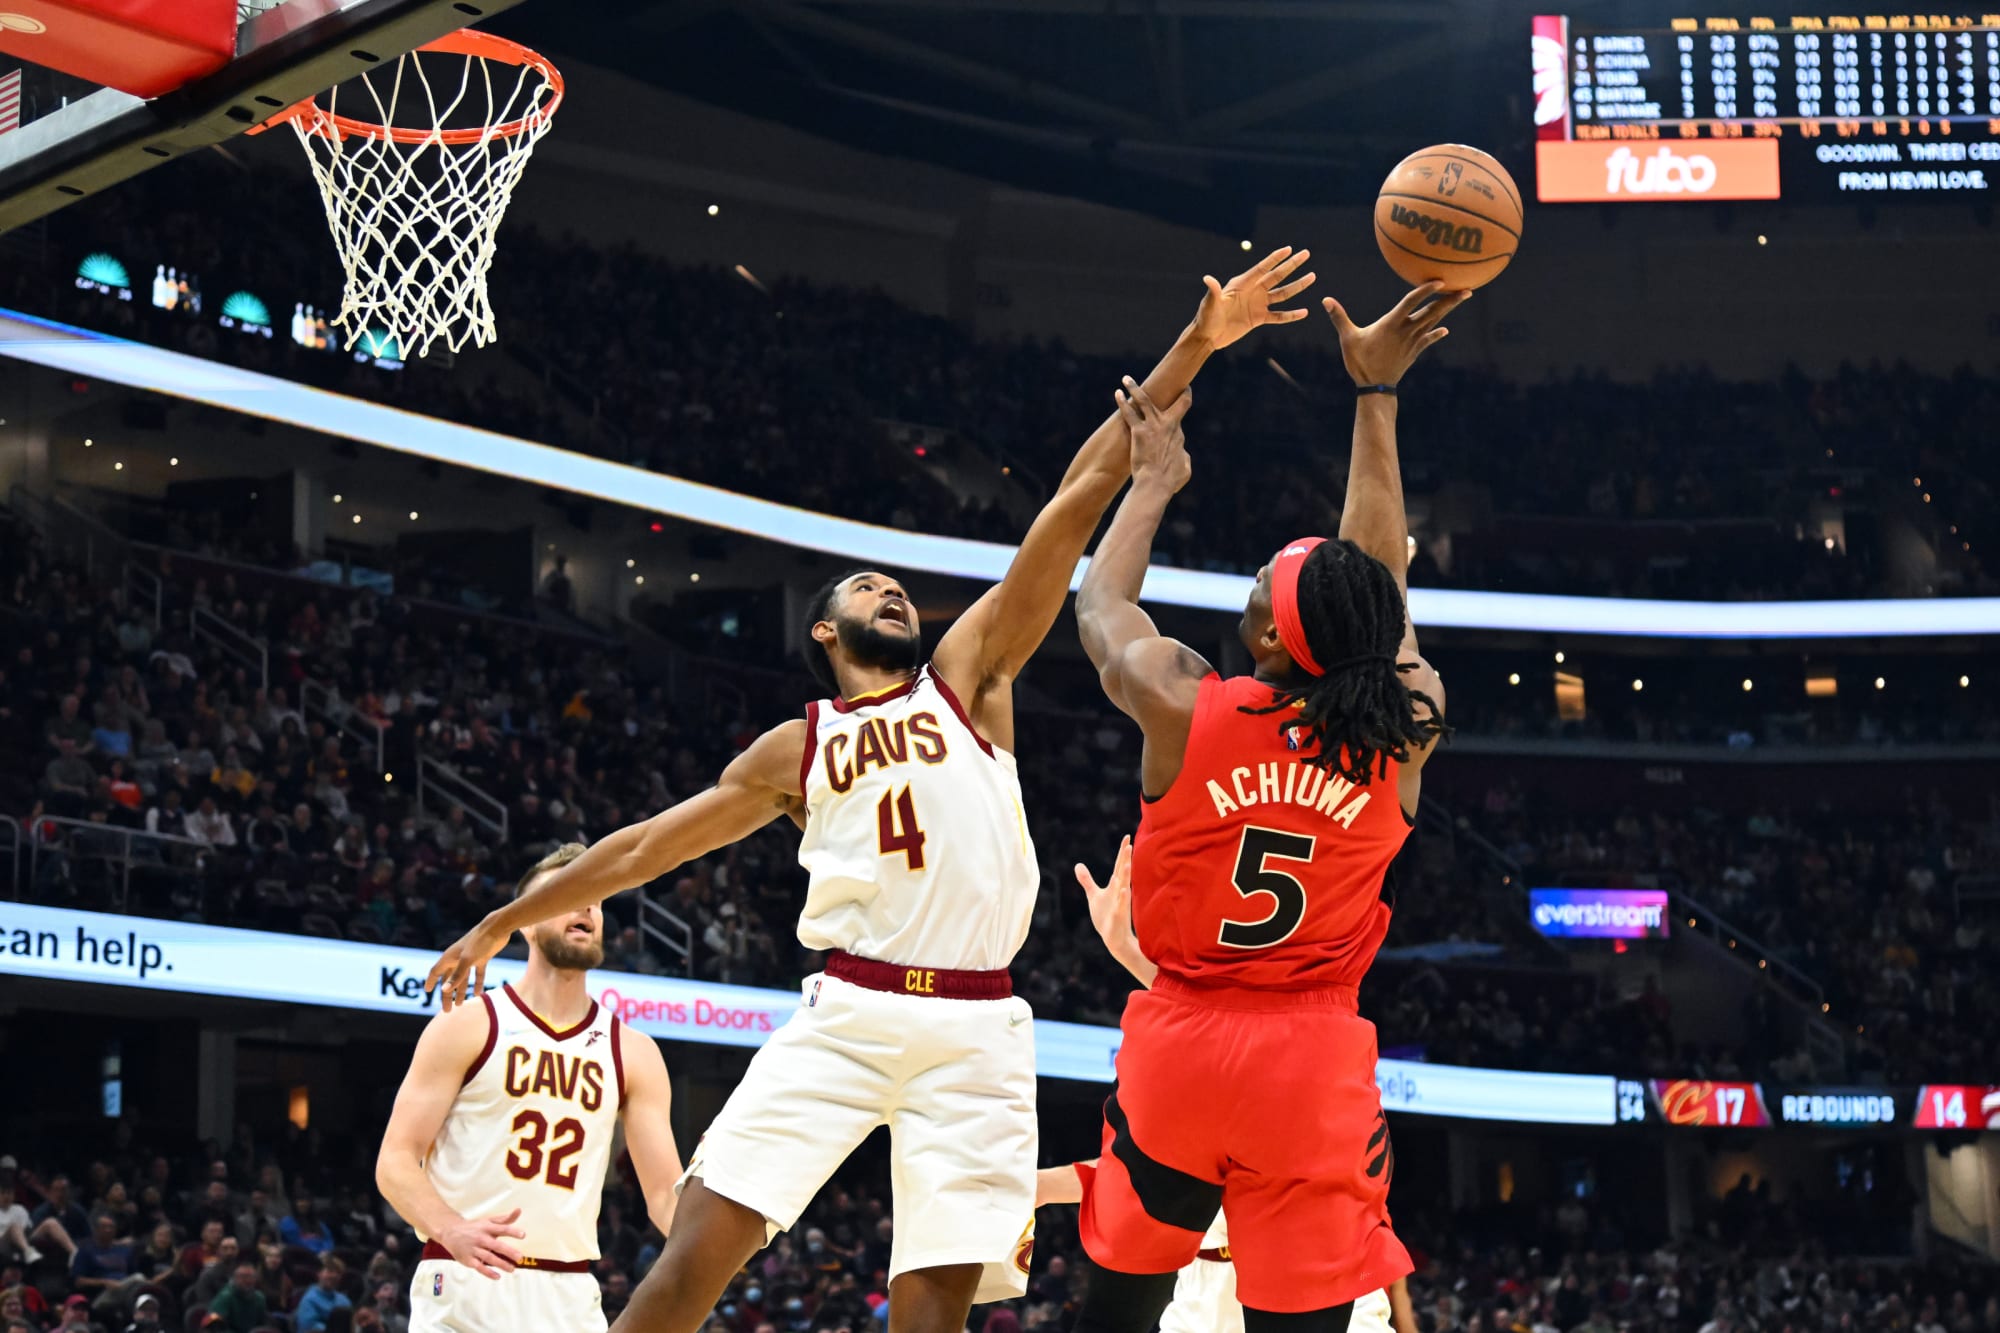 How do the Toronto Raptors match up against the Cavaliers?